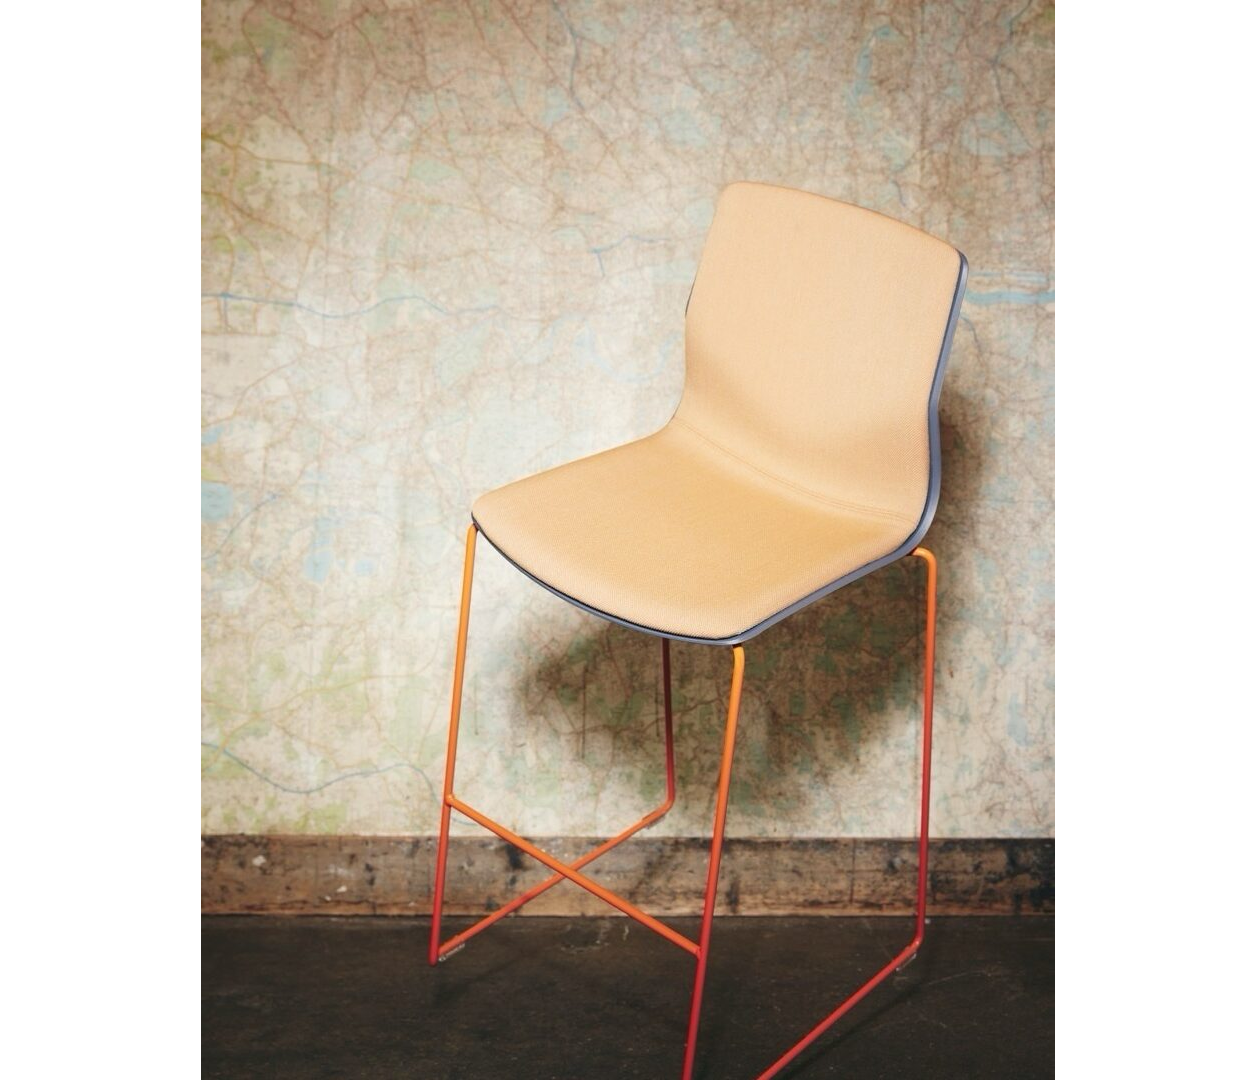 OCEE&FOUR – Chairs – FourSure 105 – Marketing Image 1 Large Large Large